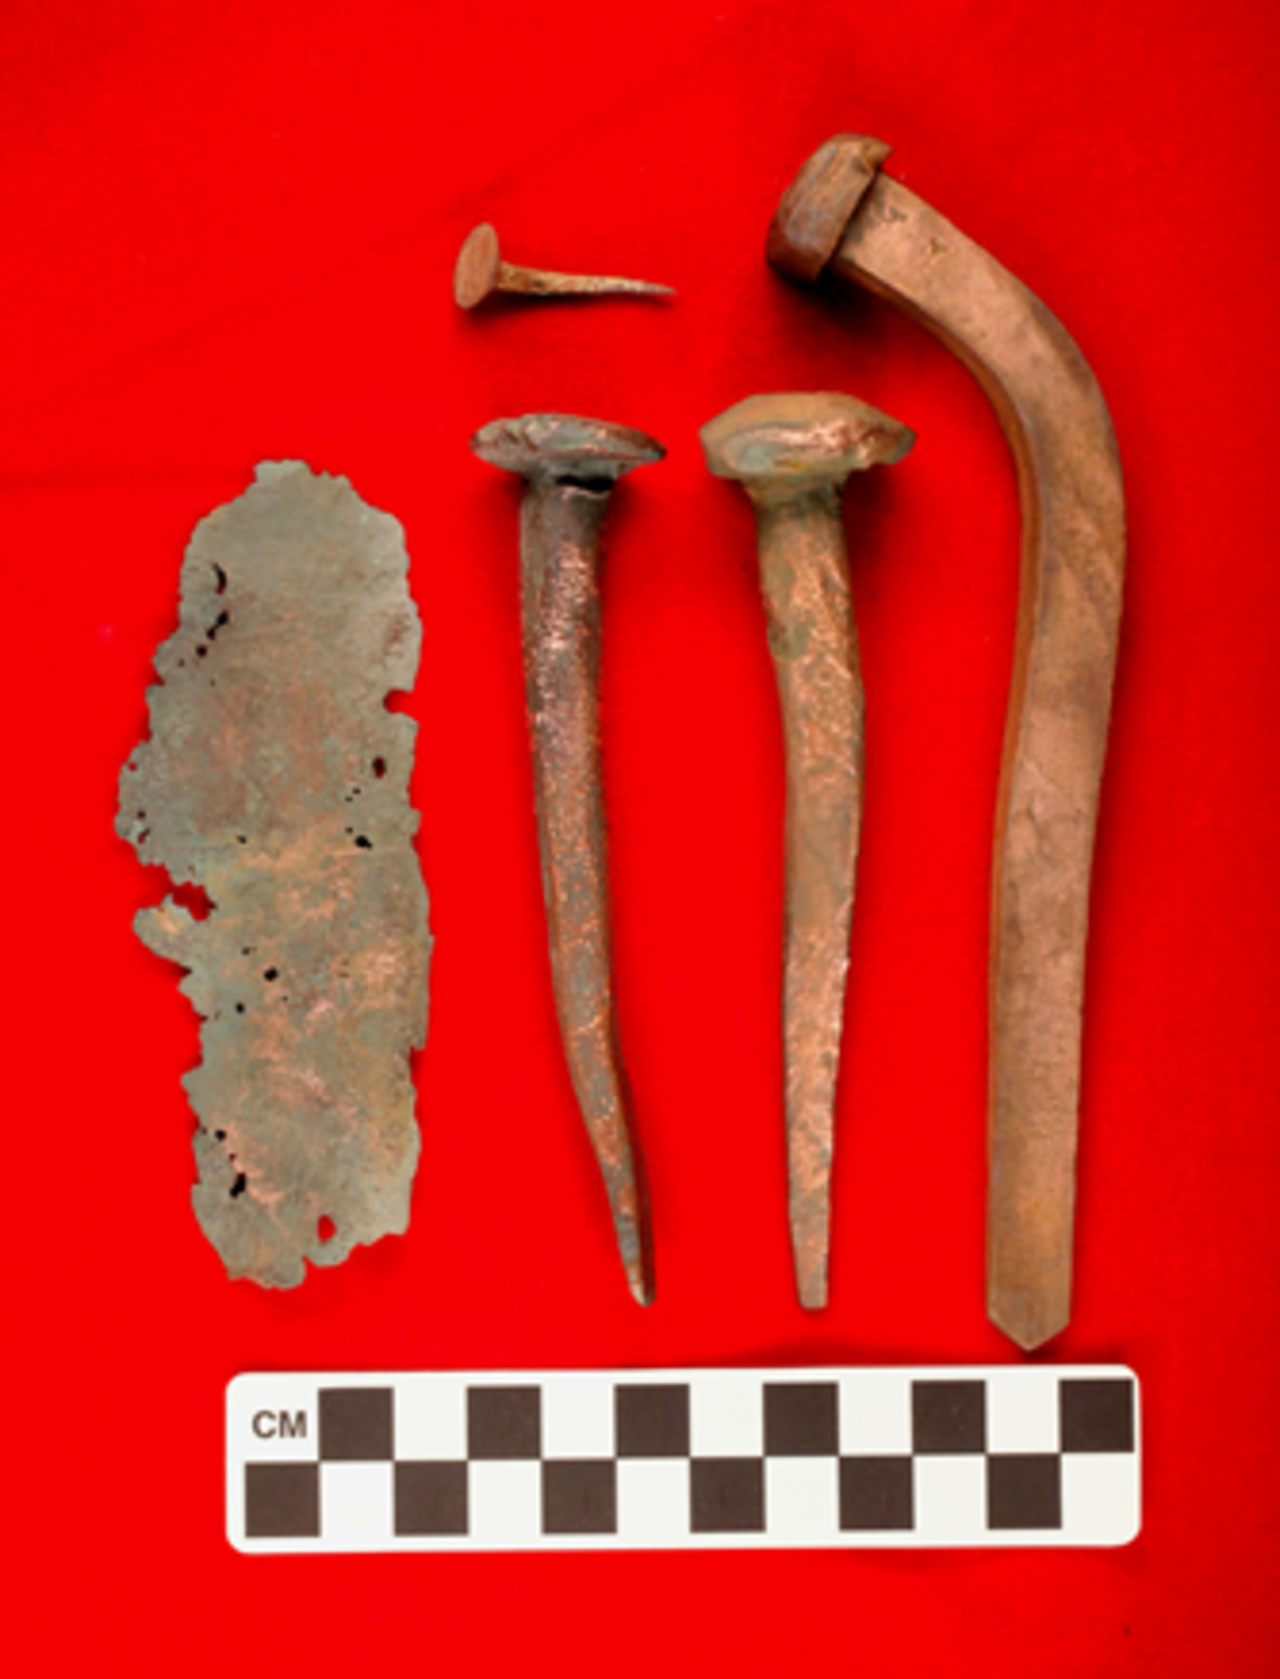 The African continent has been home to many historic finds over the years. Last June, archaeologists and divers found the remains of an 18th century Portuguese slave ship off the coast of Cape Town, South Africa. The ship is believed to have been on its way from Mozambique to Brazil in 1794. These copper fastenings and copper sheathing were also uncovered. 